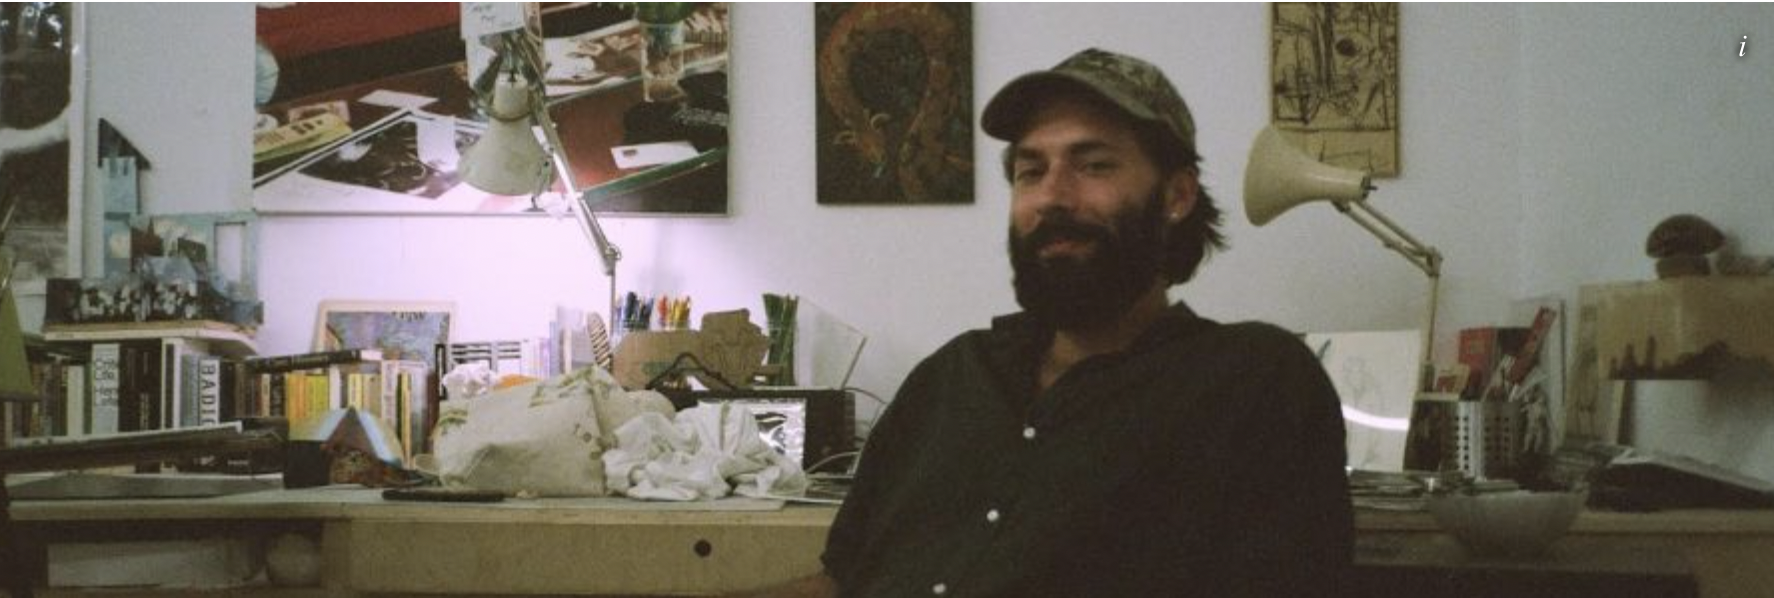  A still image of Tristan Unrau sitting by his desk in his studio. 